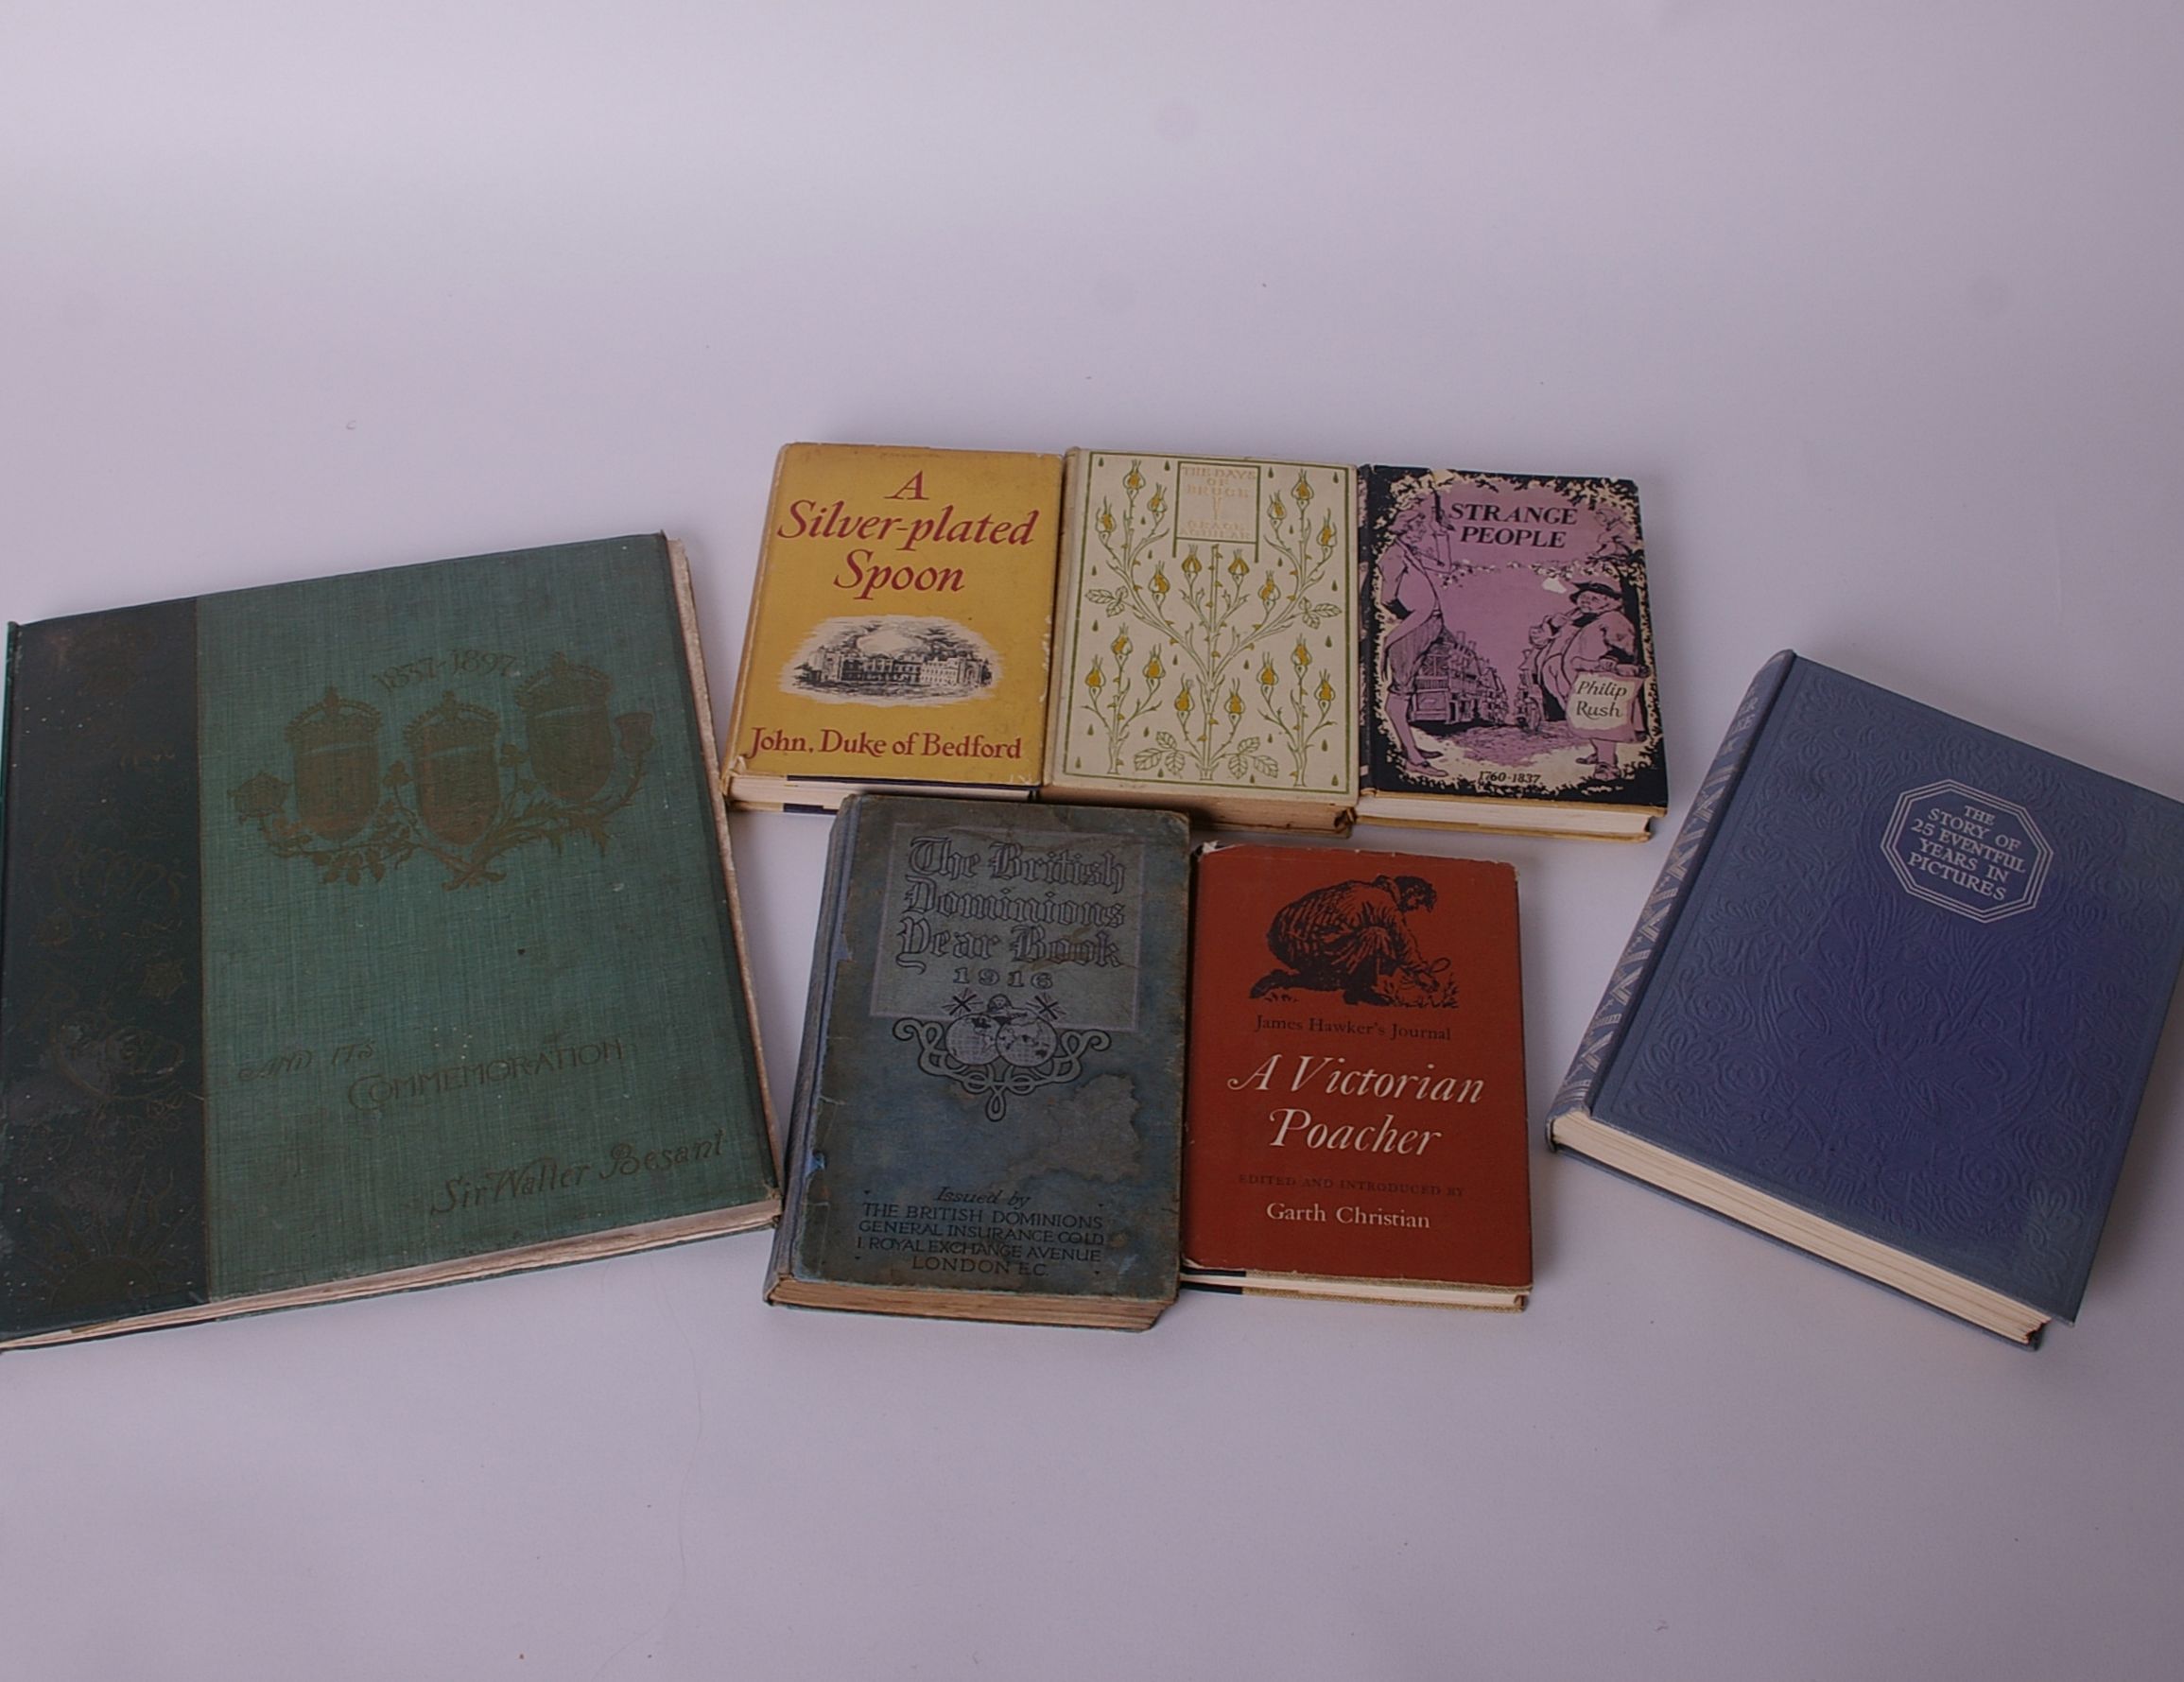 A quantity of books on the subjects of royalty, history, nature and rural life. The Queen’s Reign - Image 2 of 5